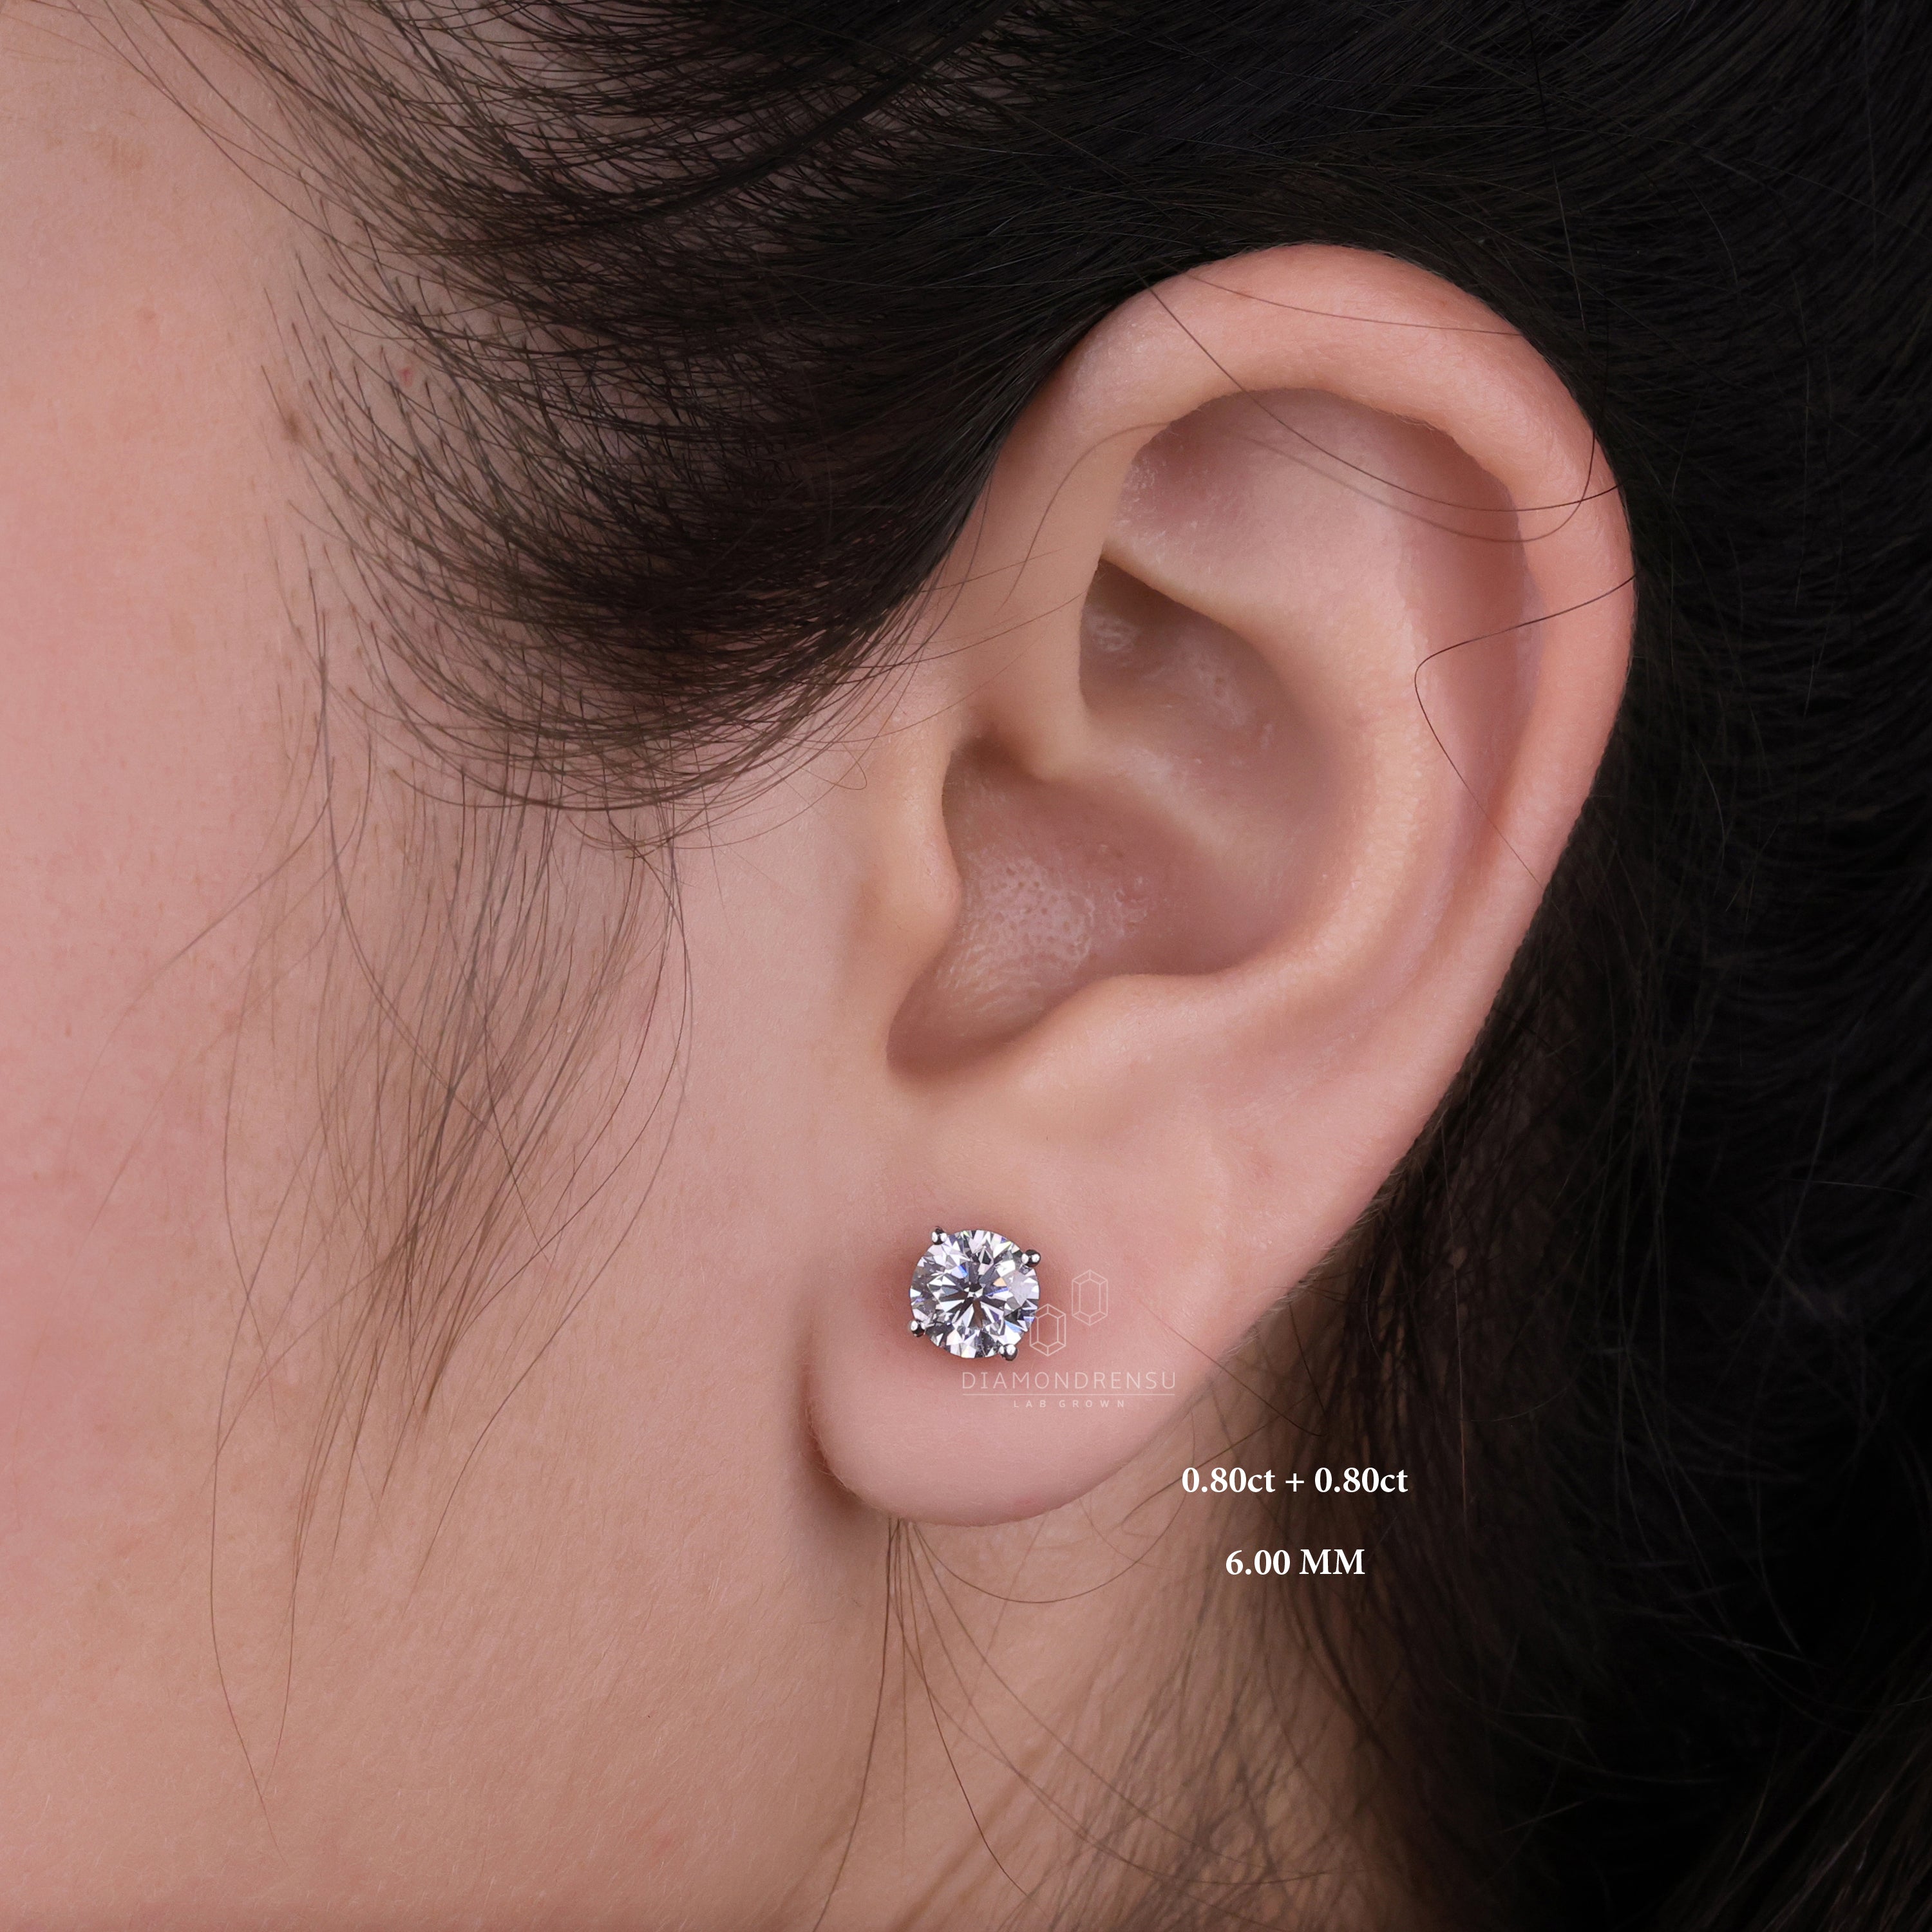 Lab grown diamond earrings worn by a model, demonstrating their versatility and radiant shine in natural light